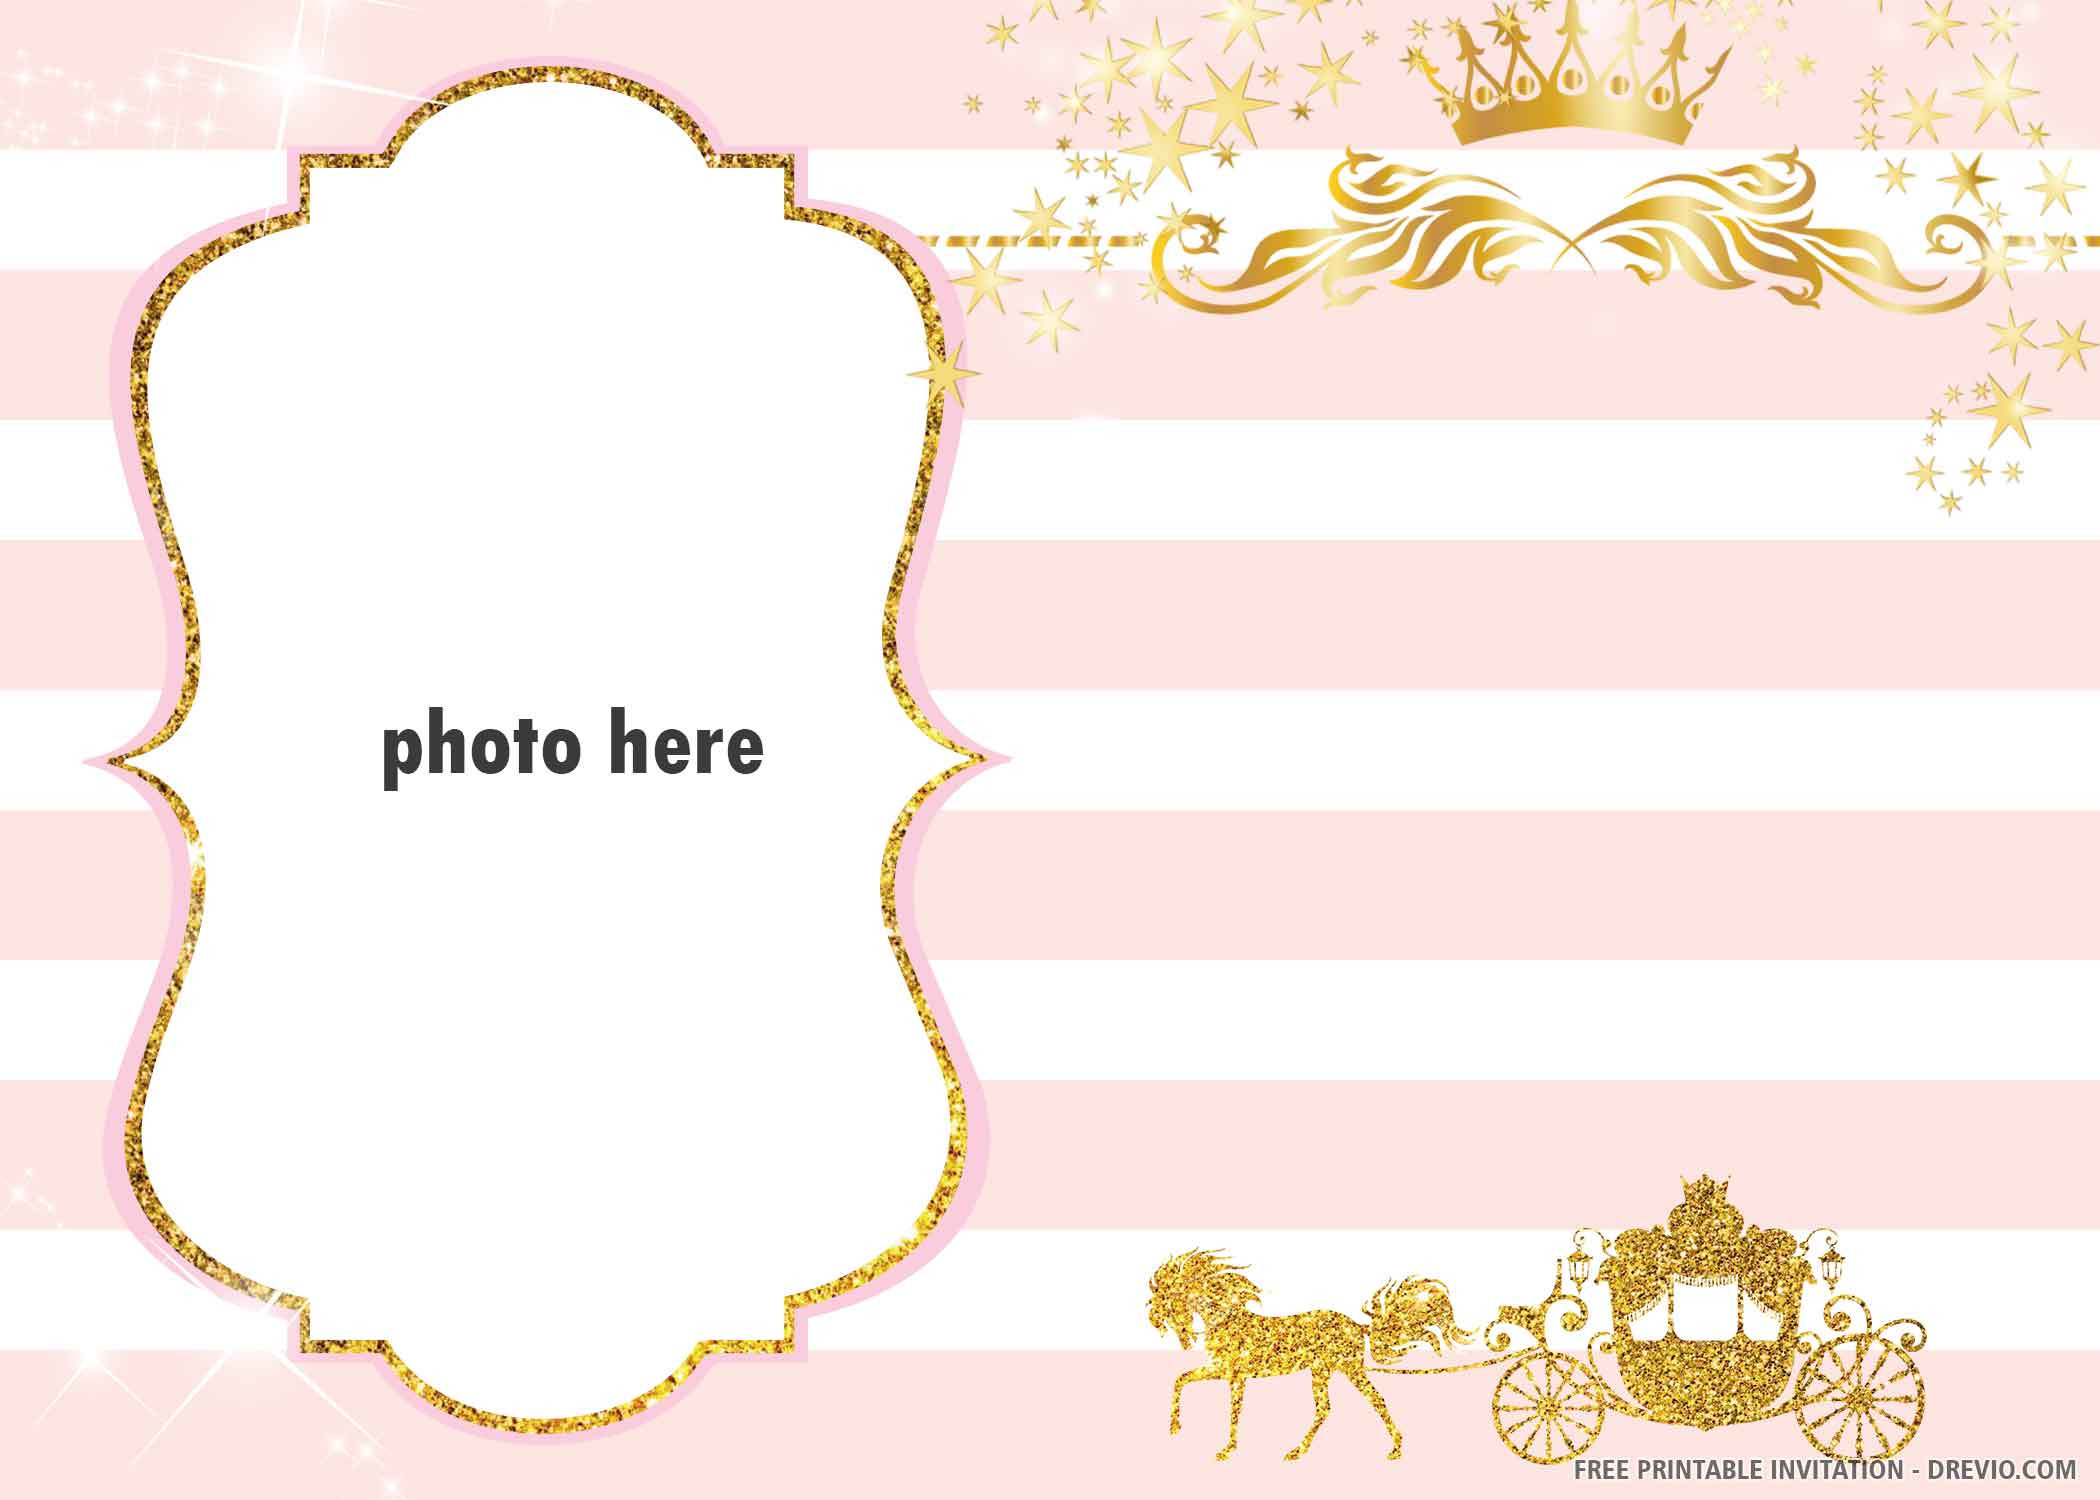 Free Printable Golden Carriage Invitation Template Download Hundreds